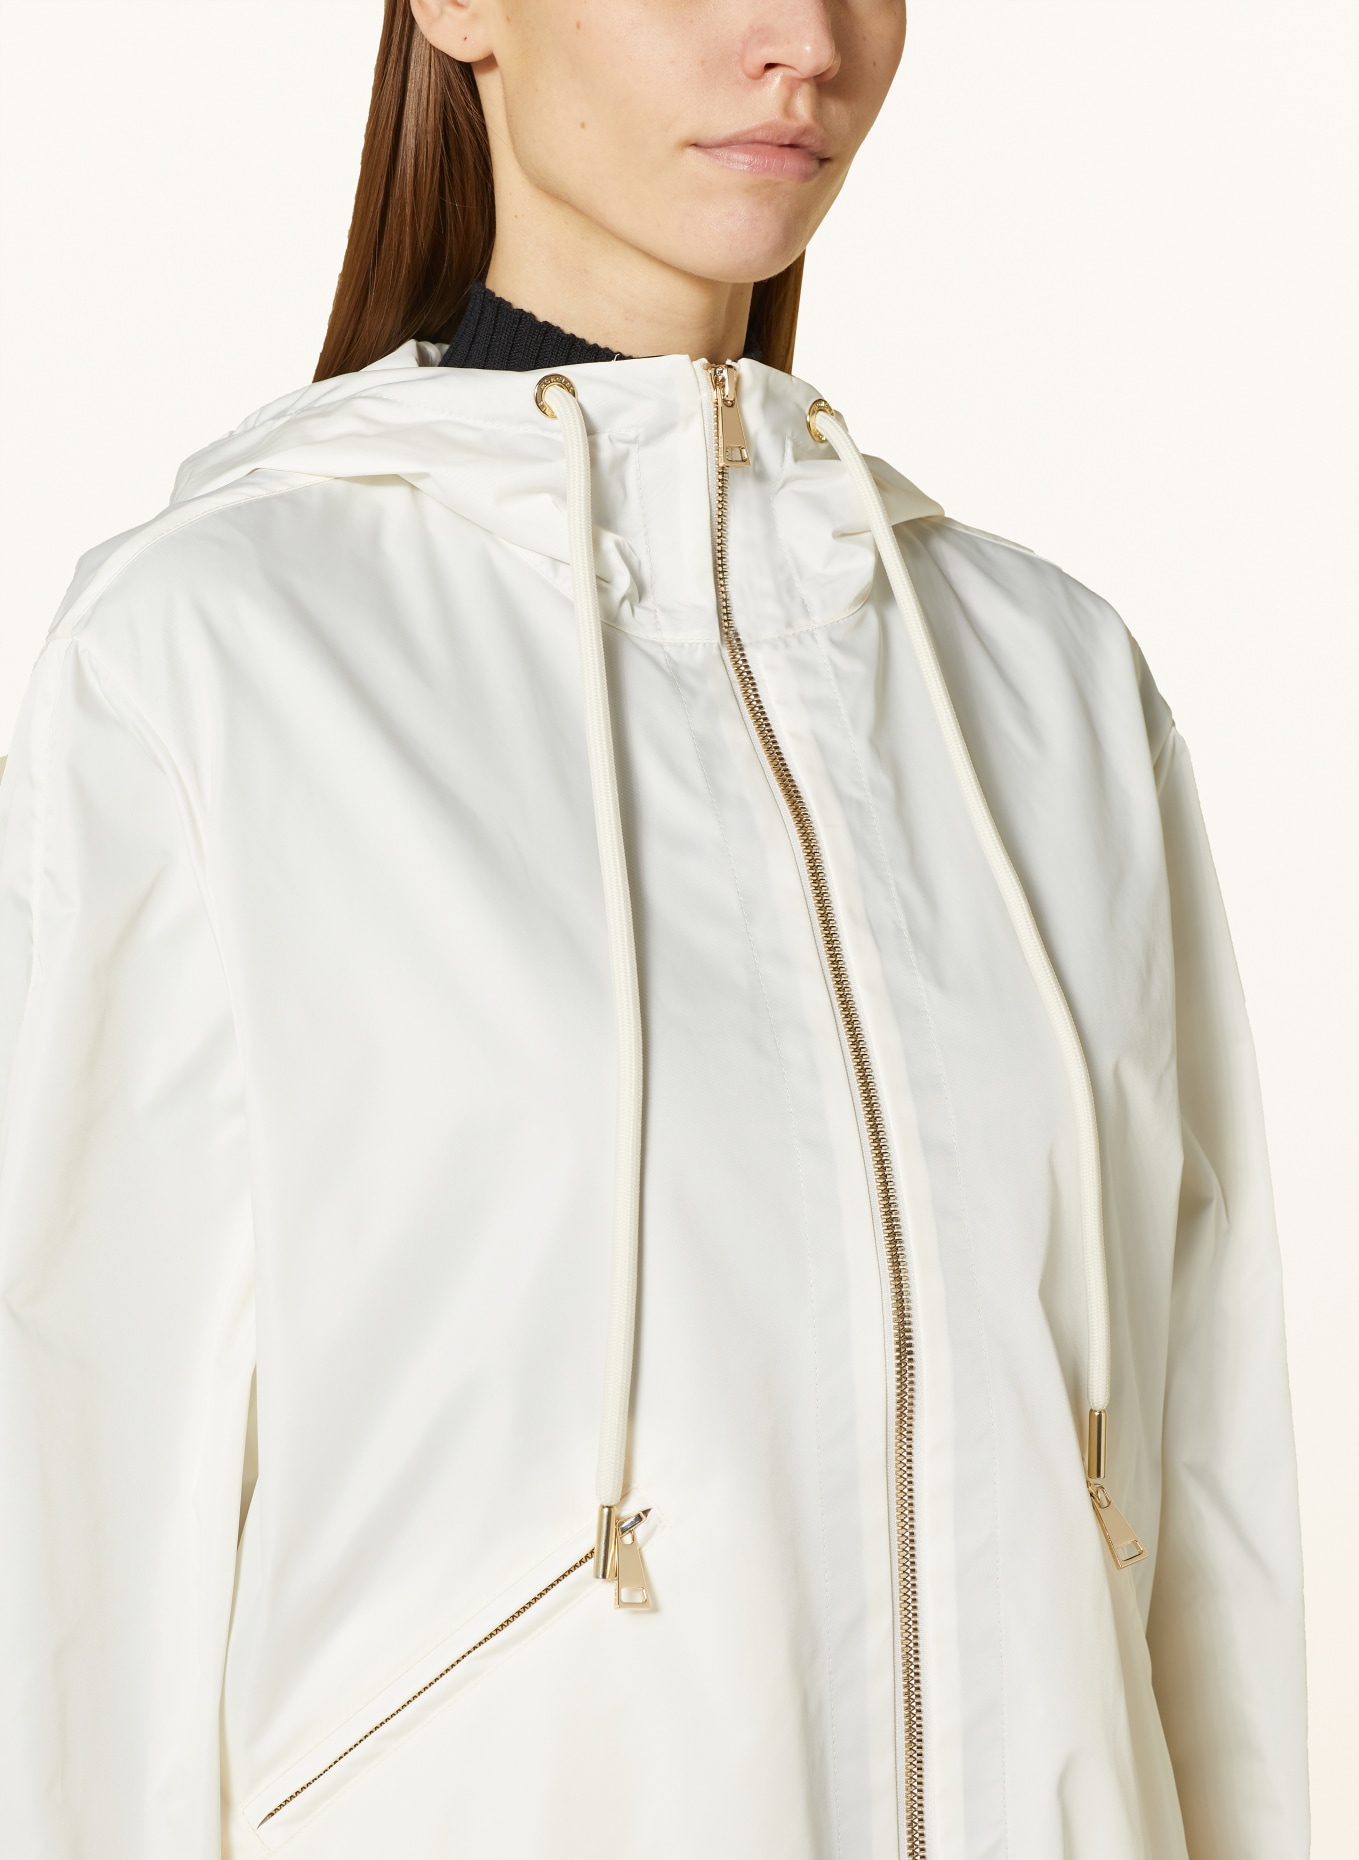 MONCLER Jacke CASSIOPEA, Farbe: WEISS (Bild 5)